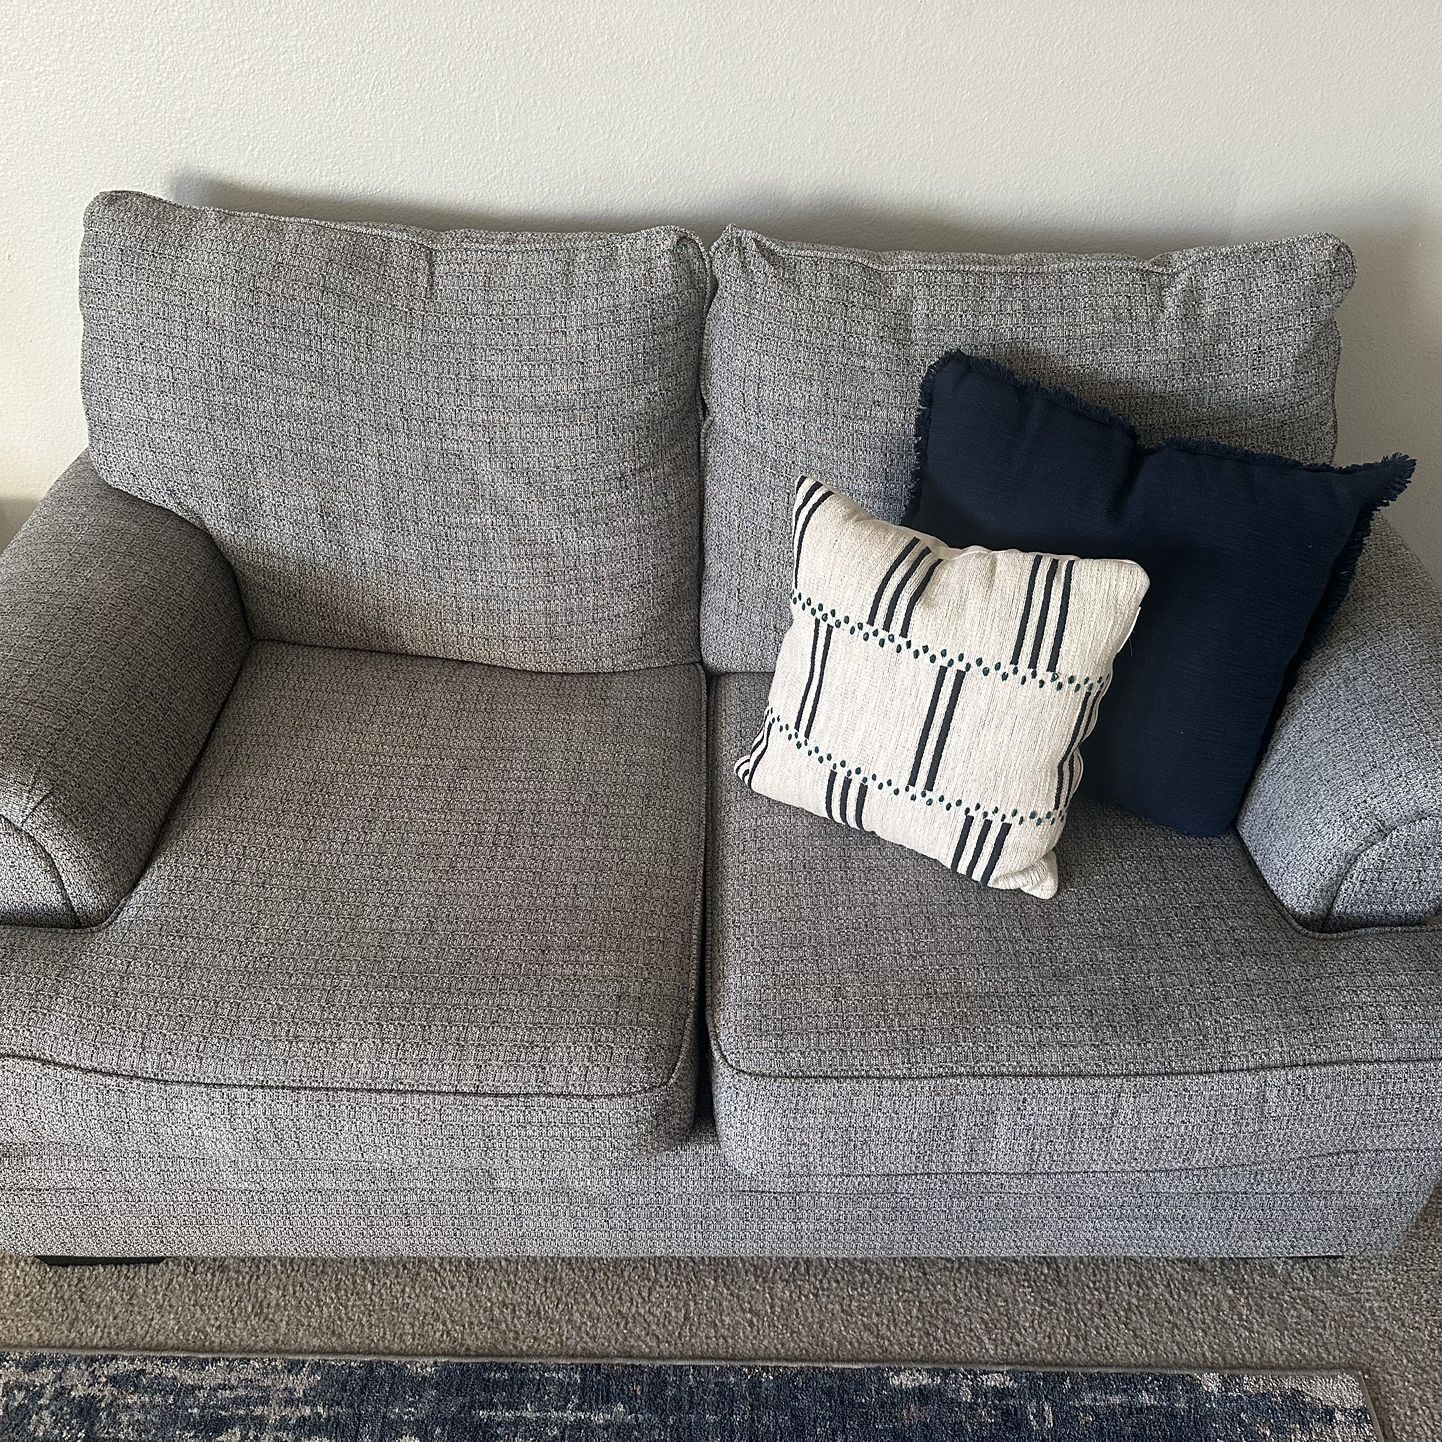 Loveseat (pillows included!)